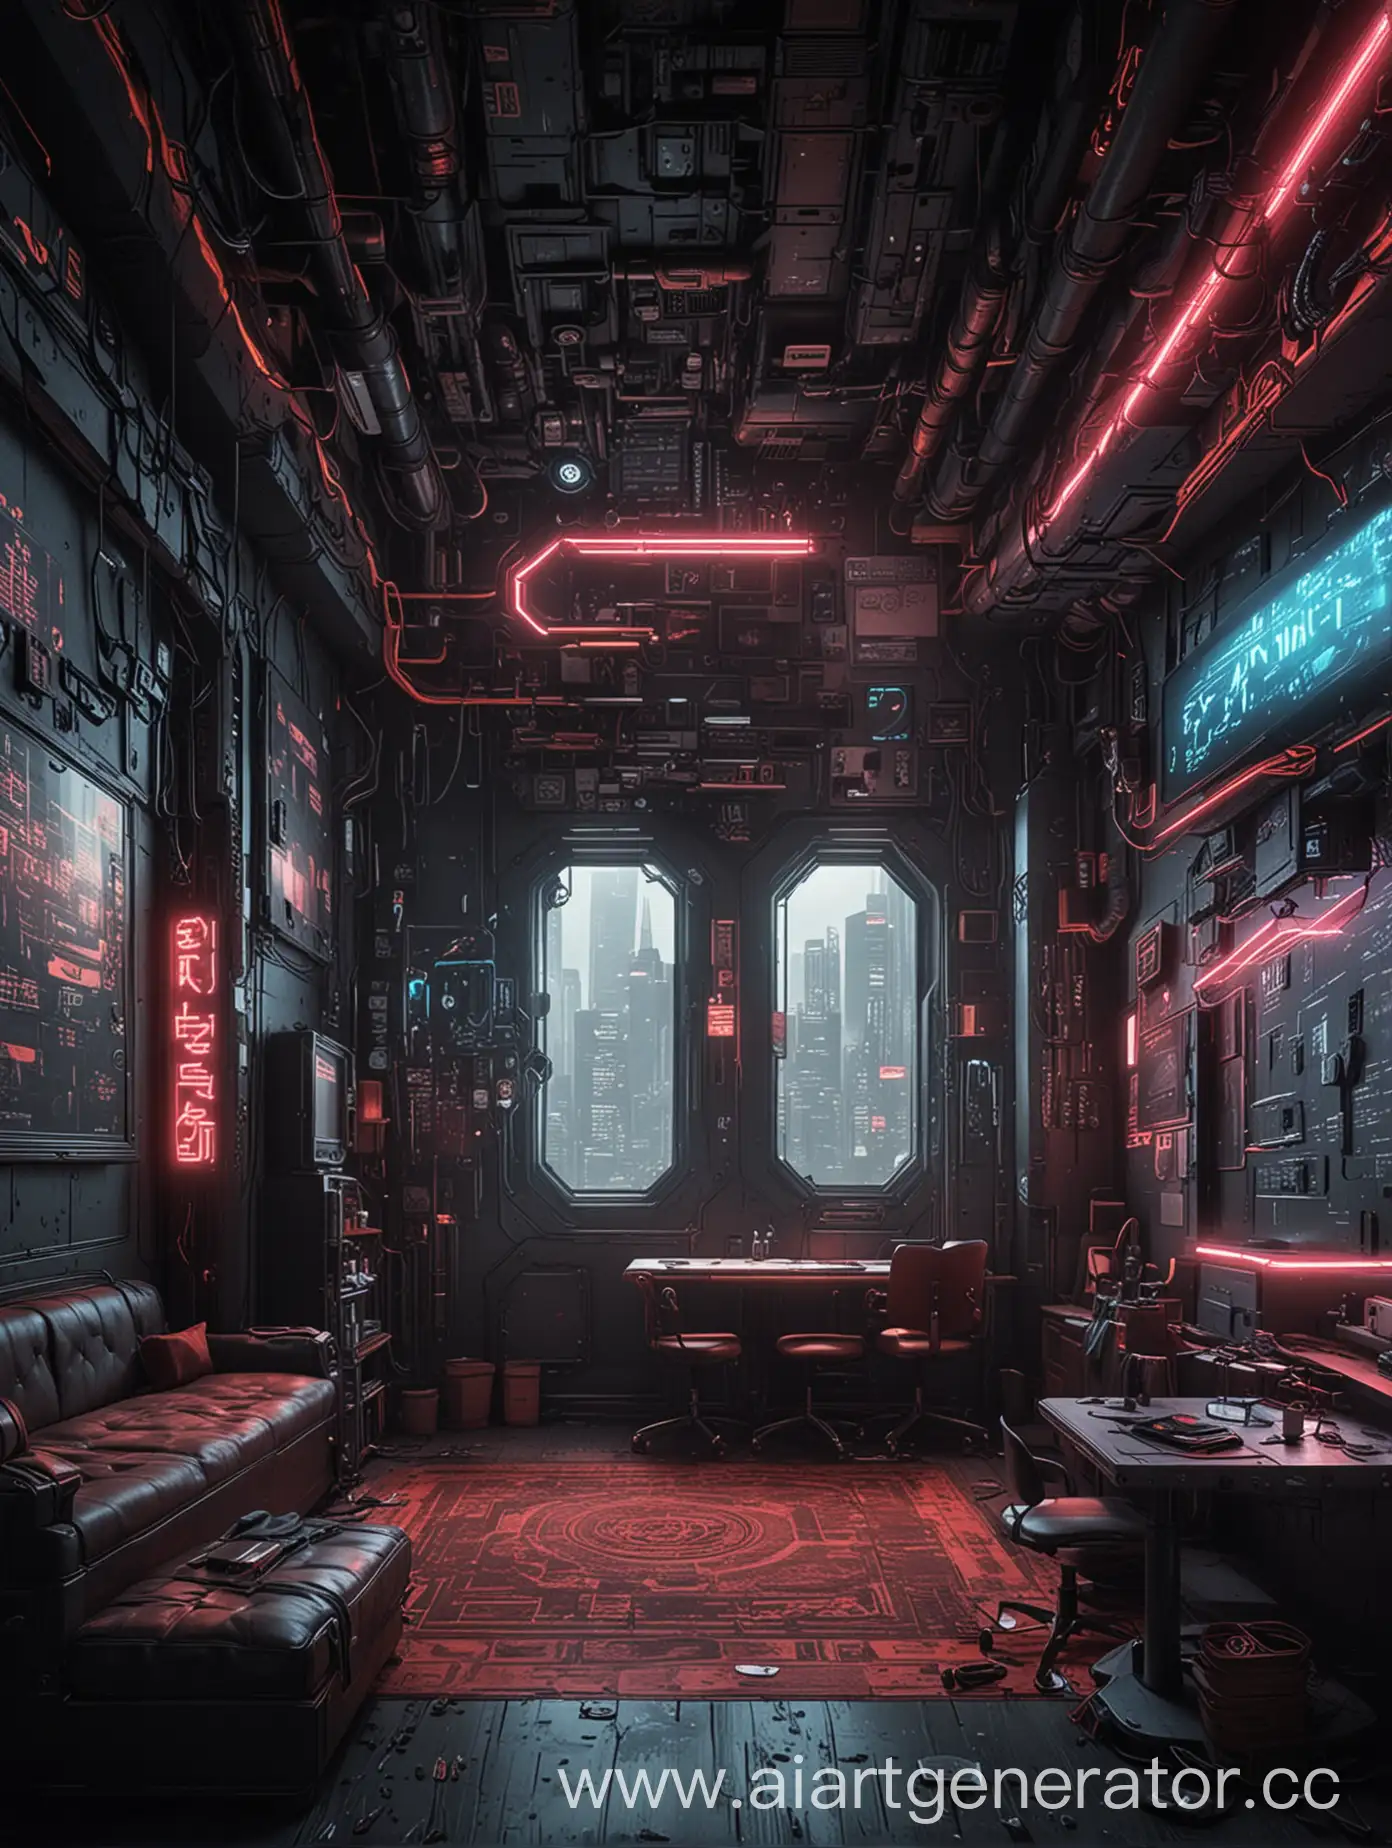 Futuristic-Cyberpunk-Interior-Design-with-Neon-Lights-and-HighTech-Elements